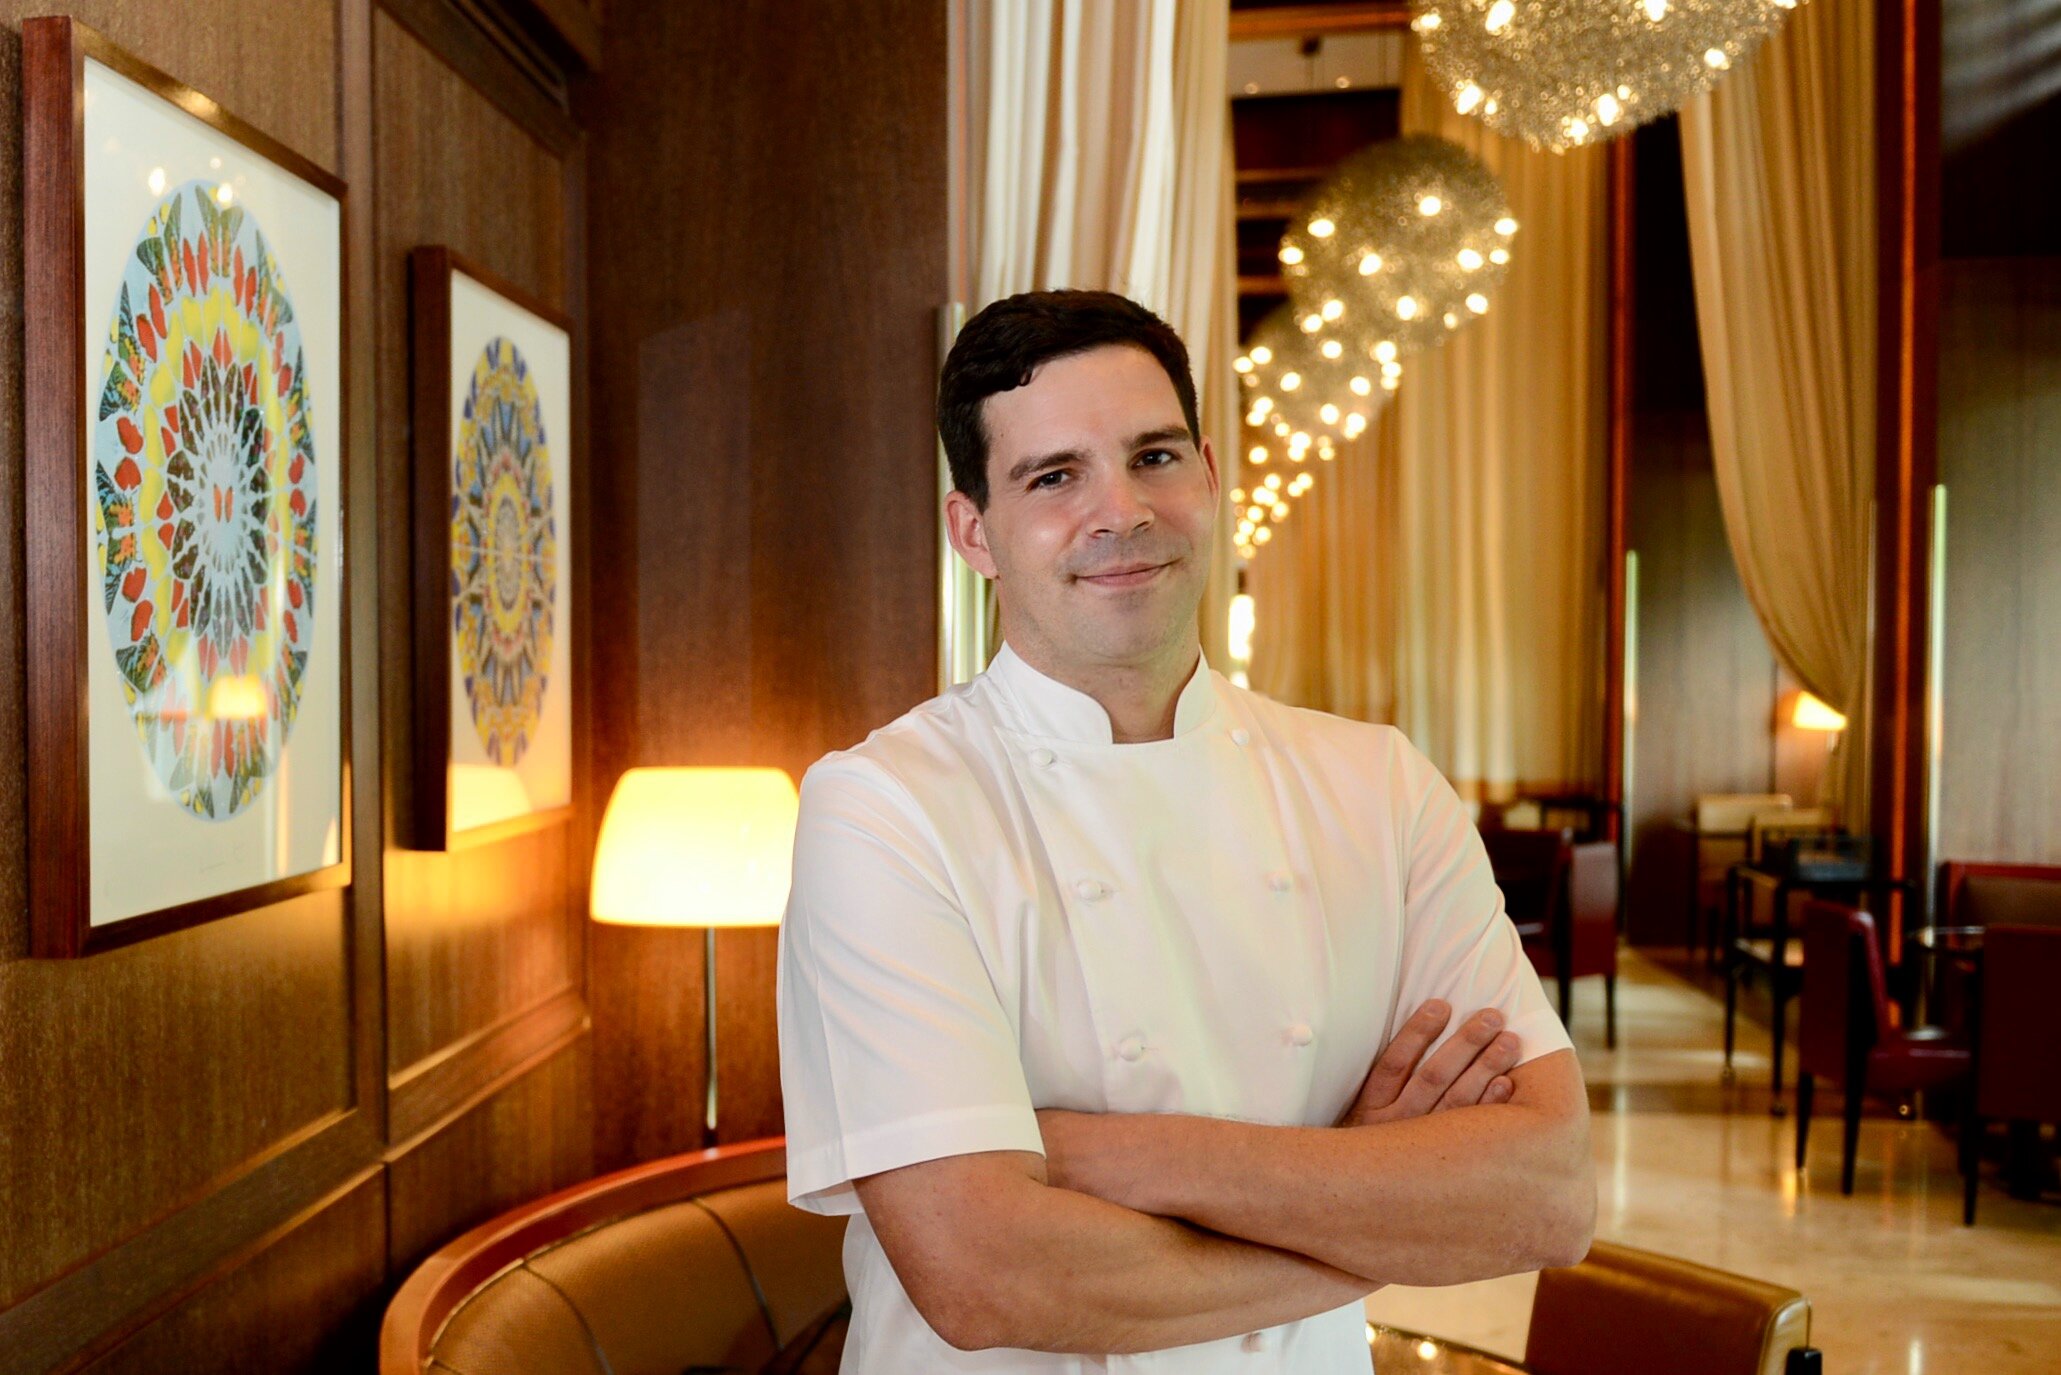 Jamie Shears appointed executive chef of 45 Park Lane